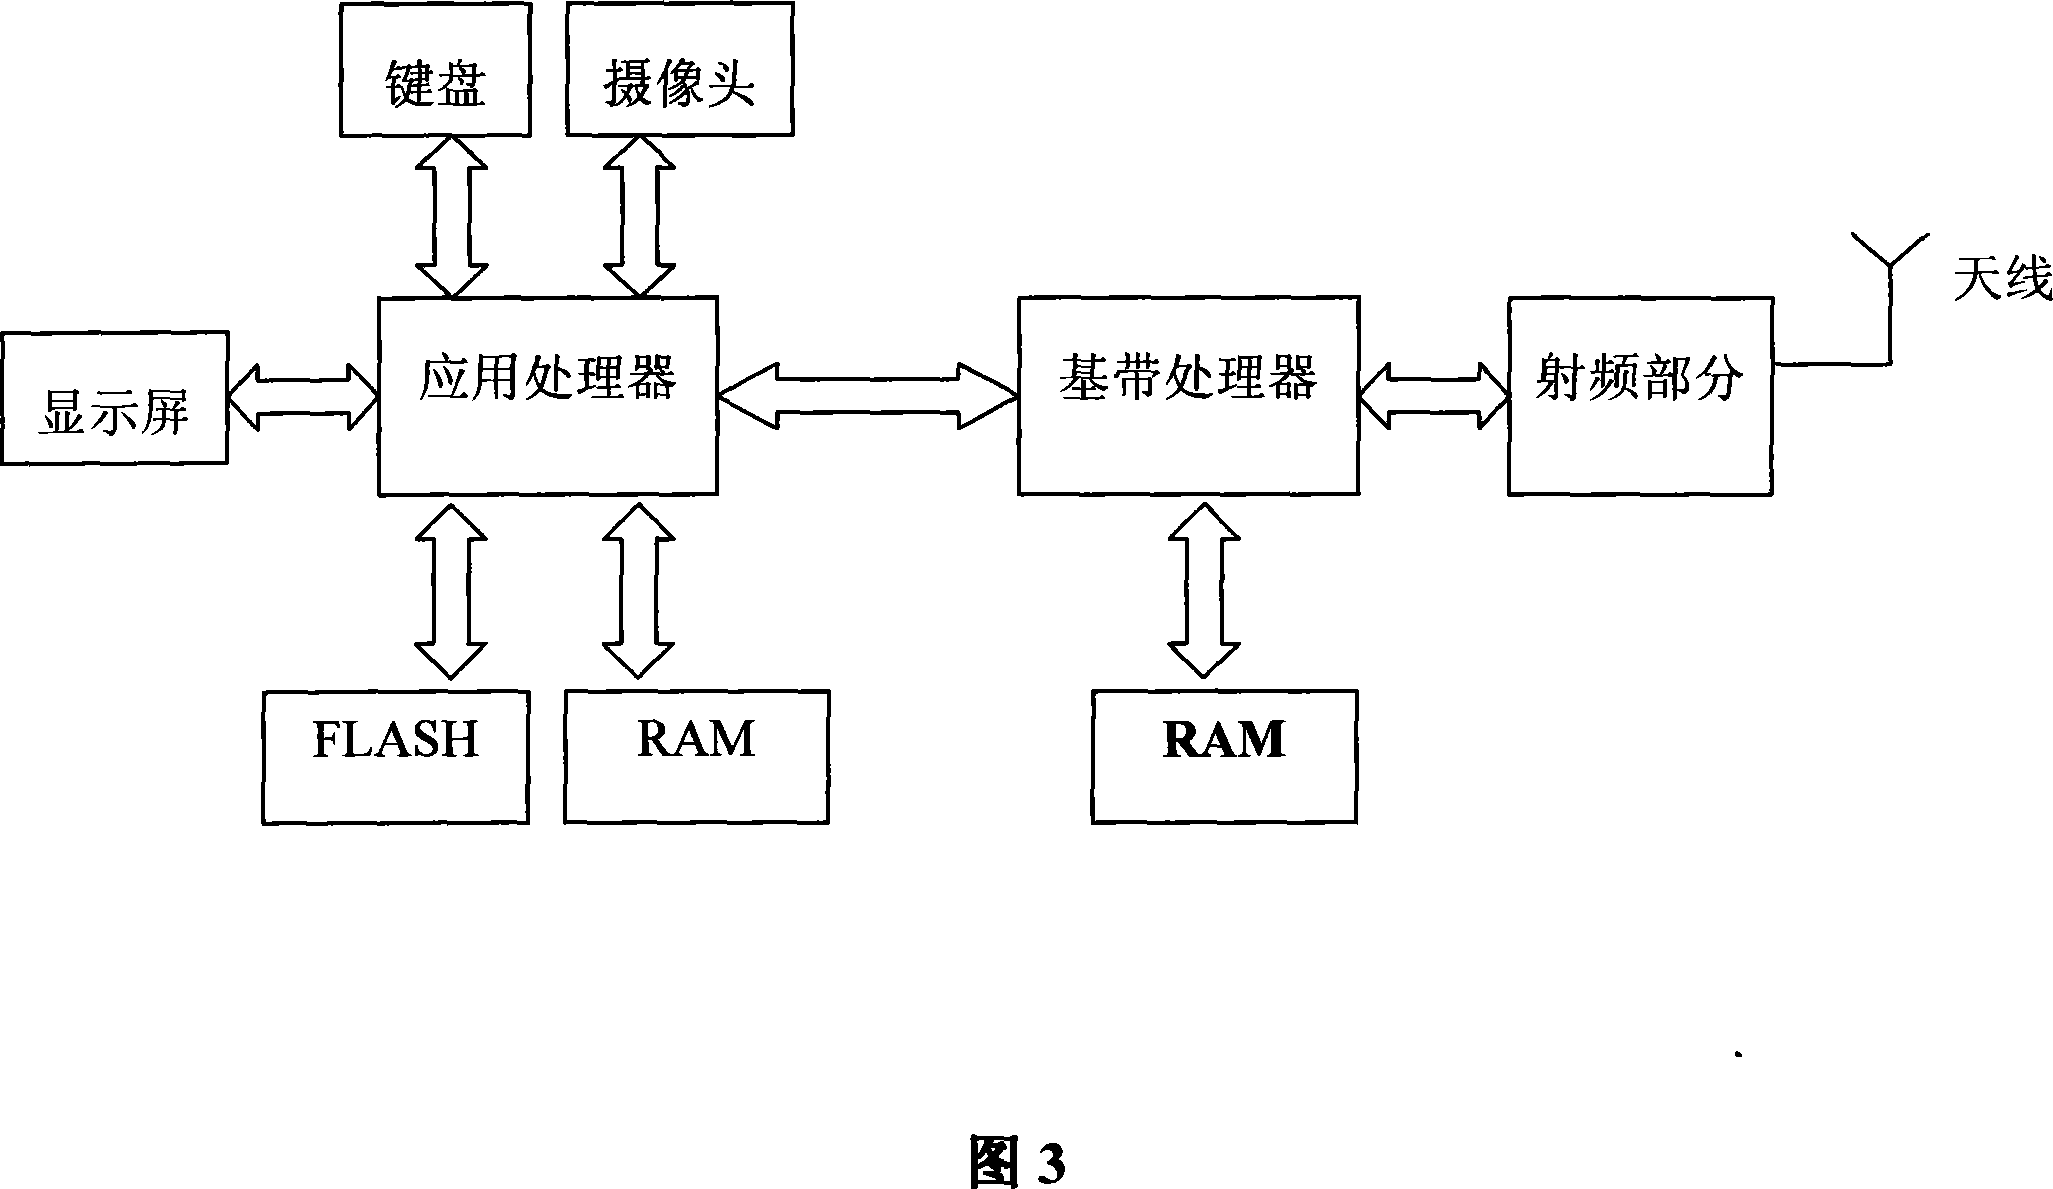 A mobile telephone based on application processor structure